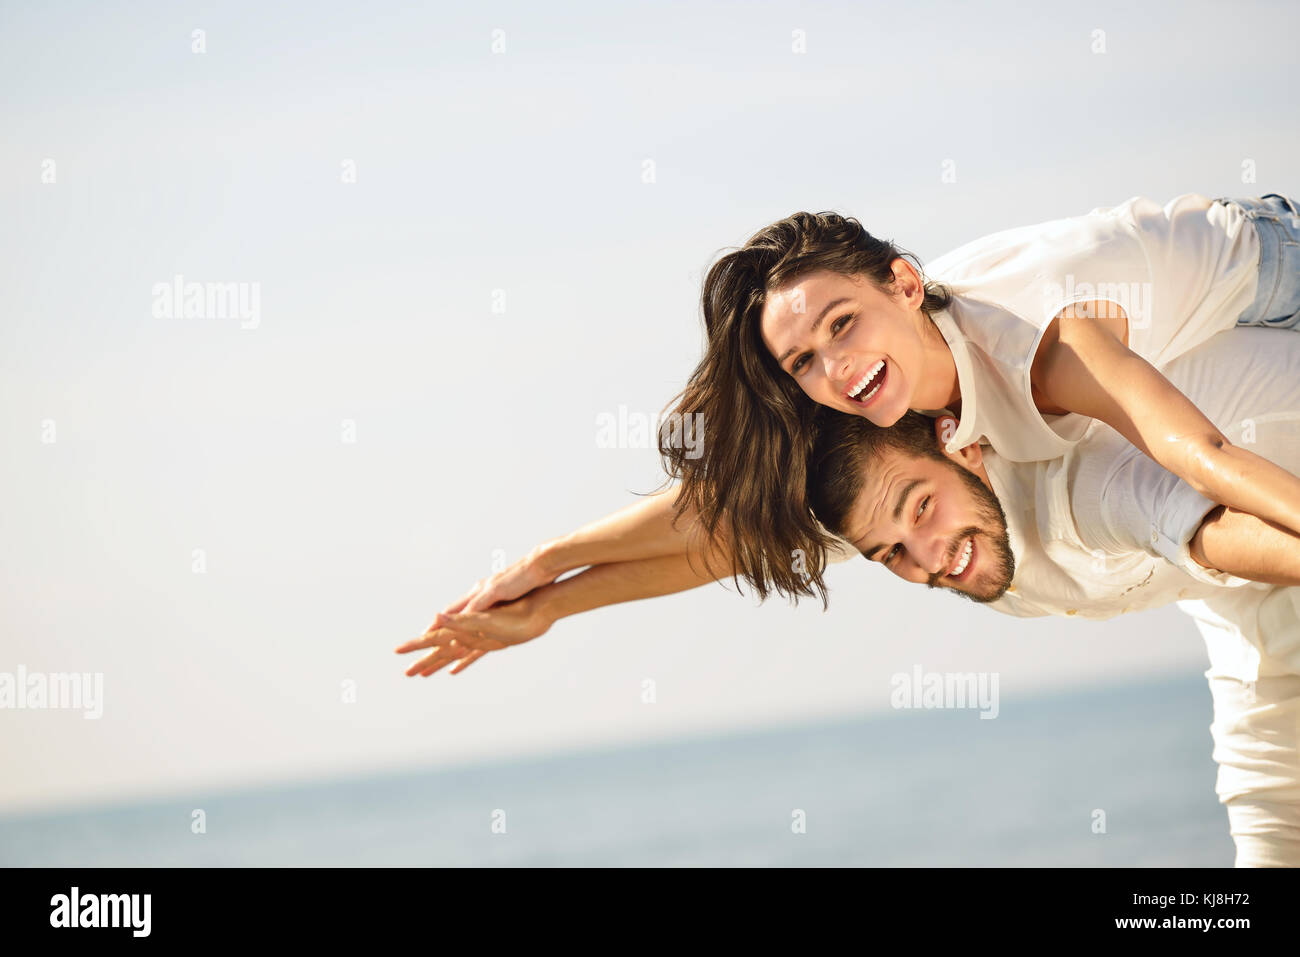 A picture of a happy couple having fun at the beach Stock Photo